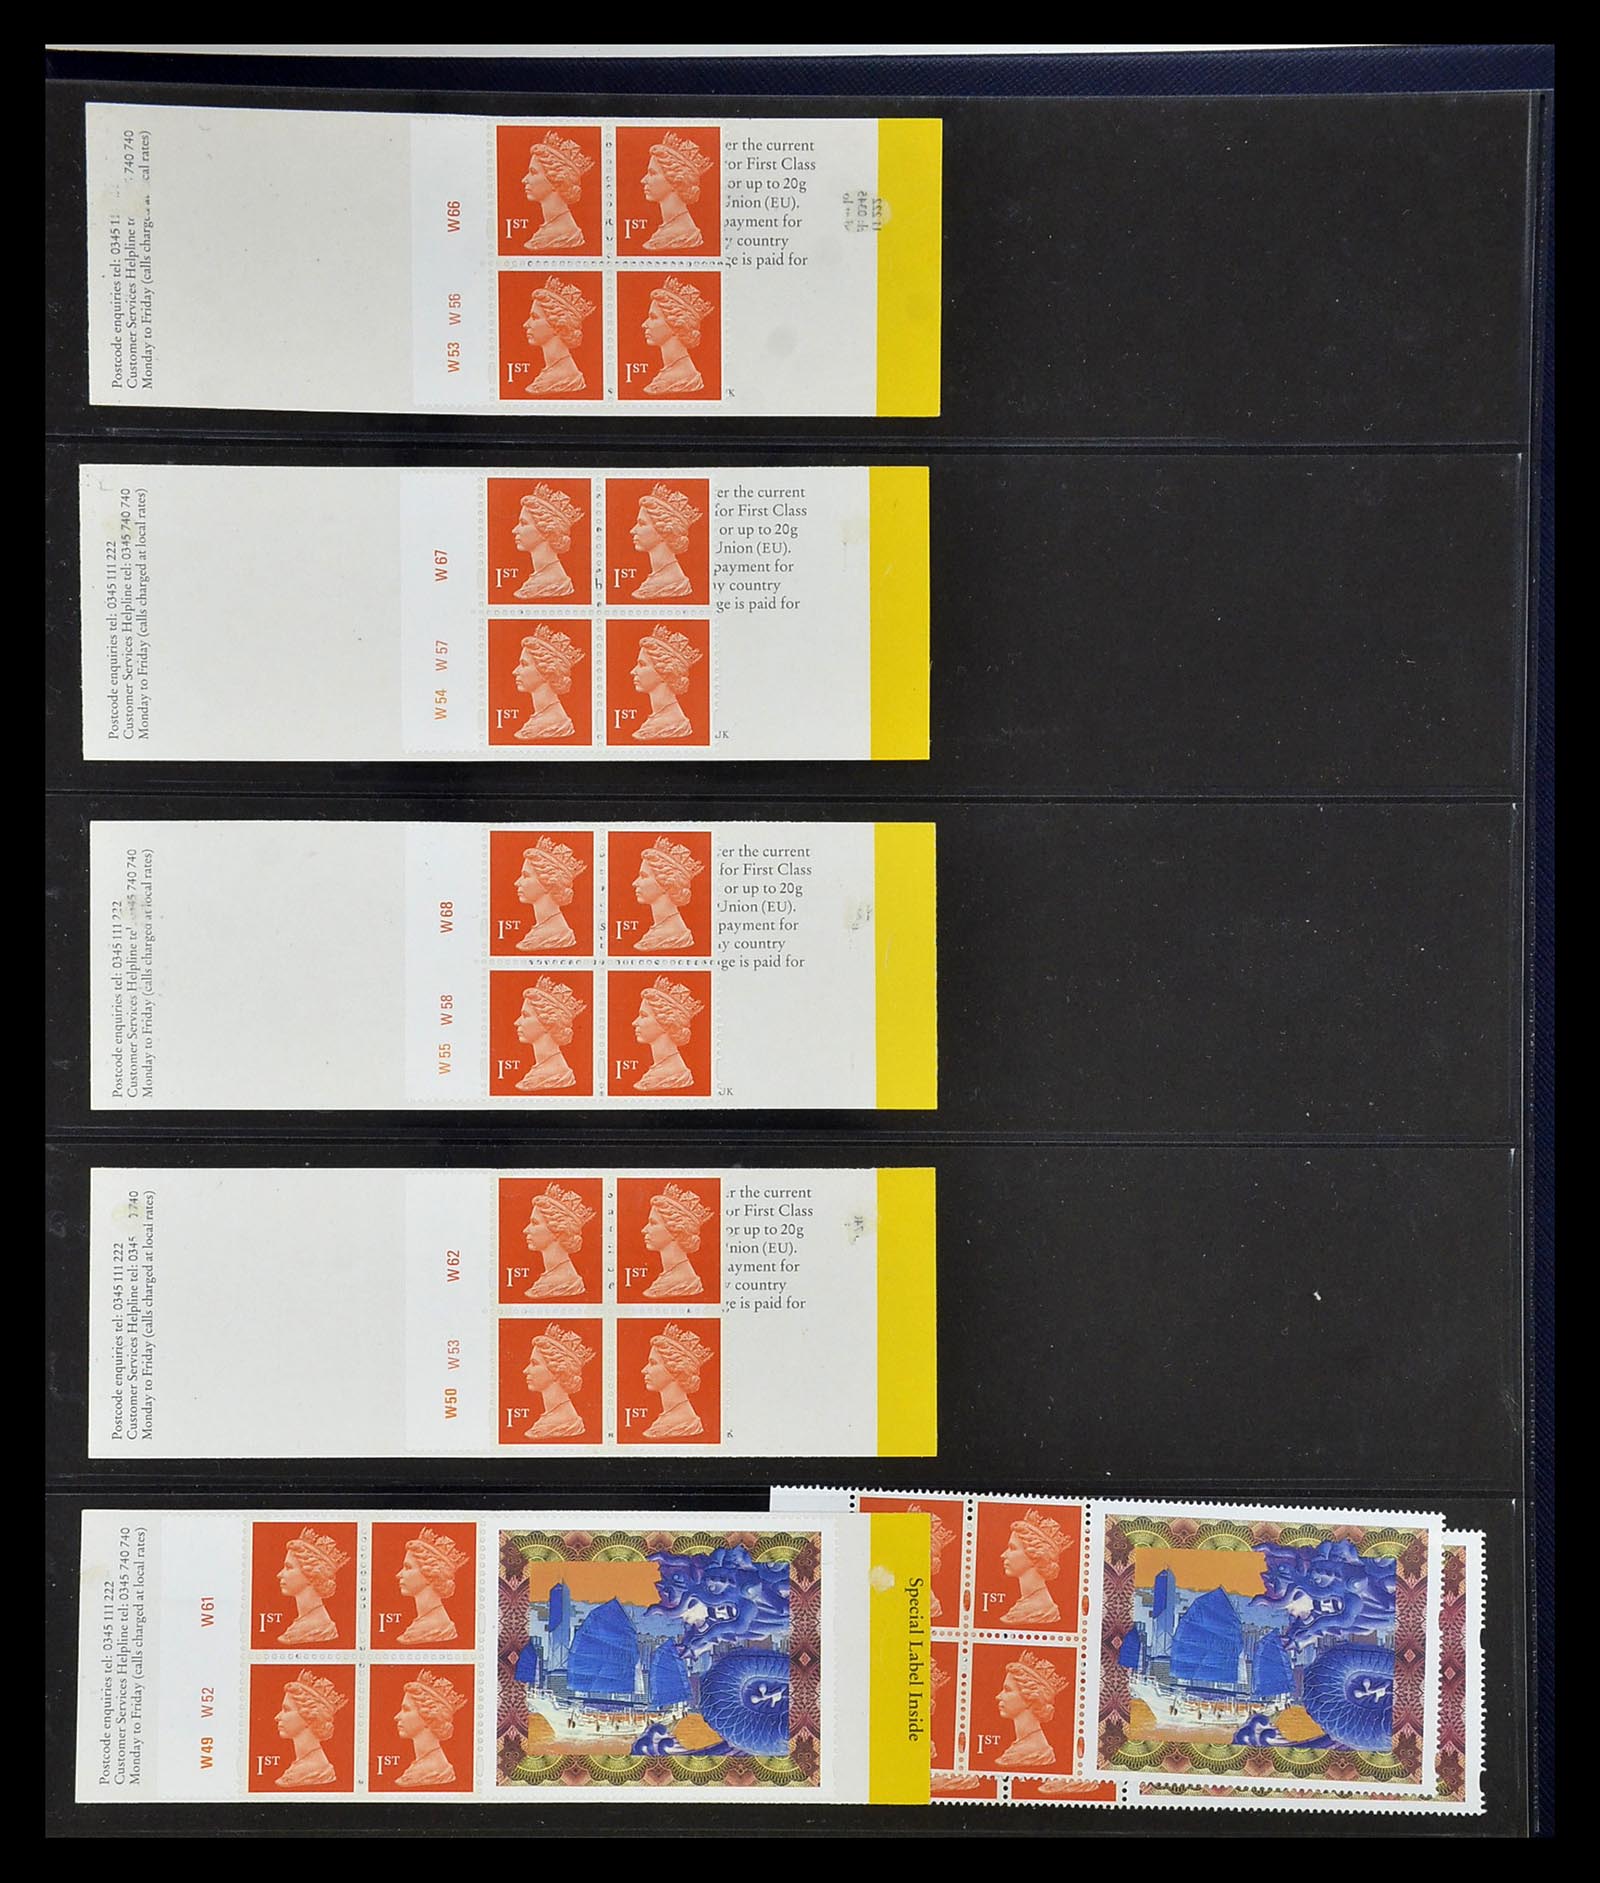 35082 023 - Stamp Collection 35082 Great Britain first class stamp booklets.